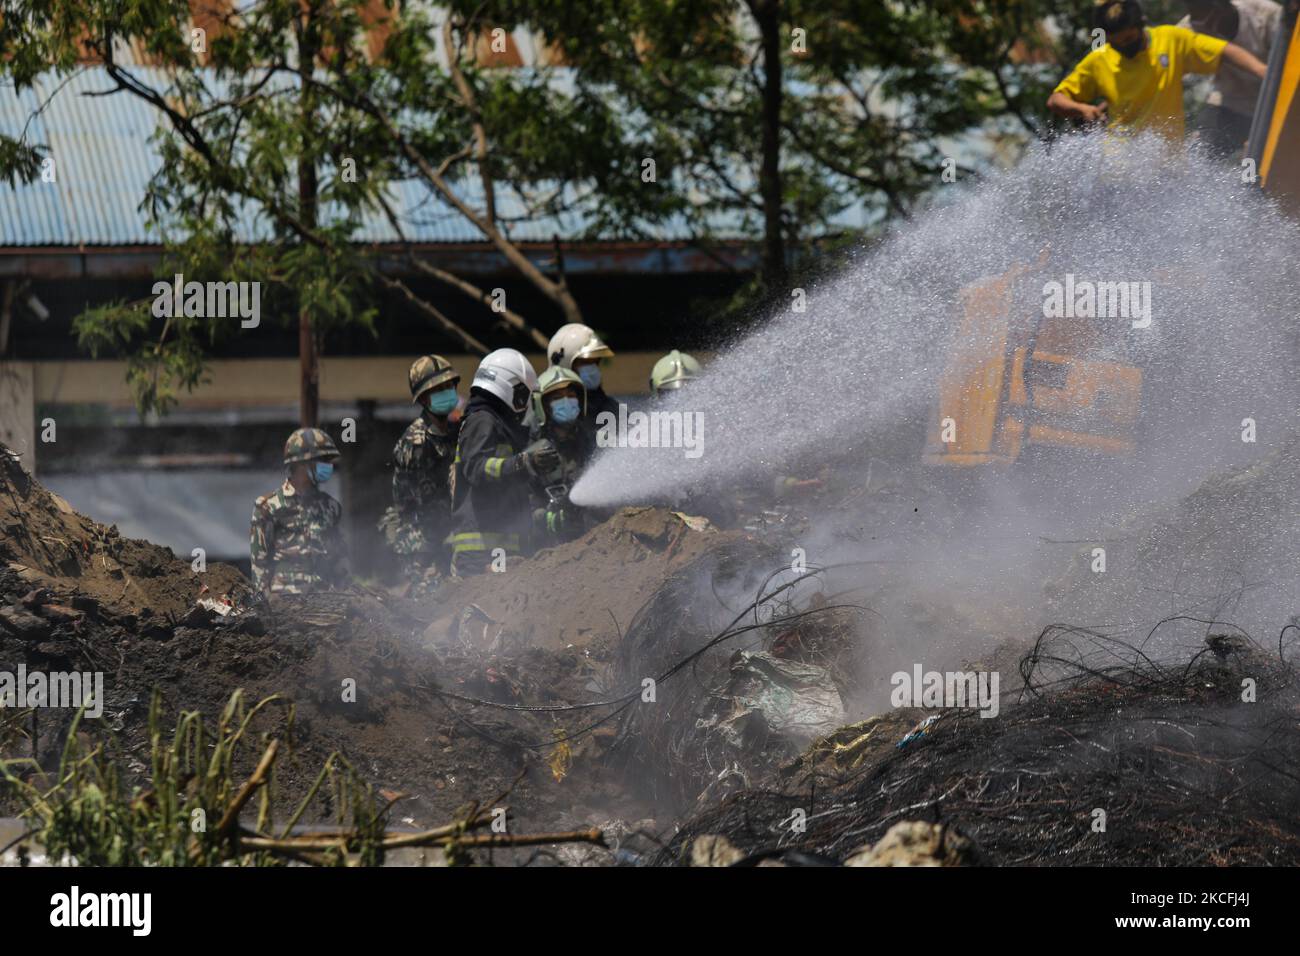 Firefighters try to douse a fire on a pile of wires at the premises of Waste Management Section in Kathmandu, Nepal on June 3, 2021. (Photo by Sunil Pradhan/NurPhoto) Stock Photo